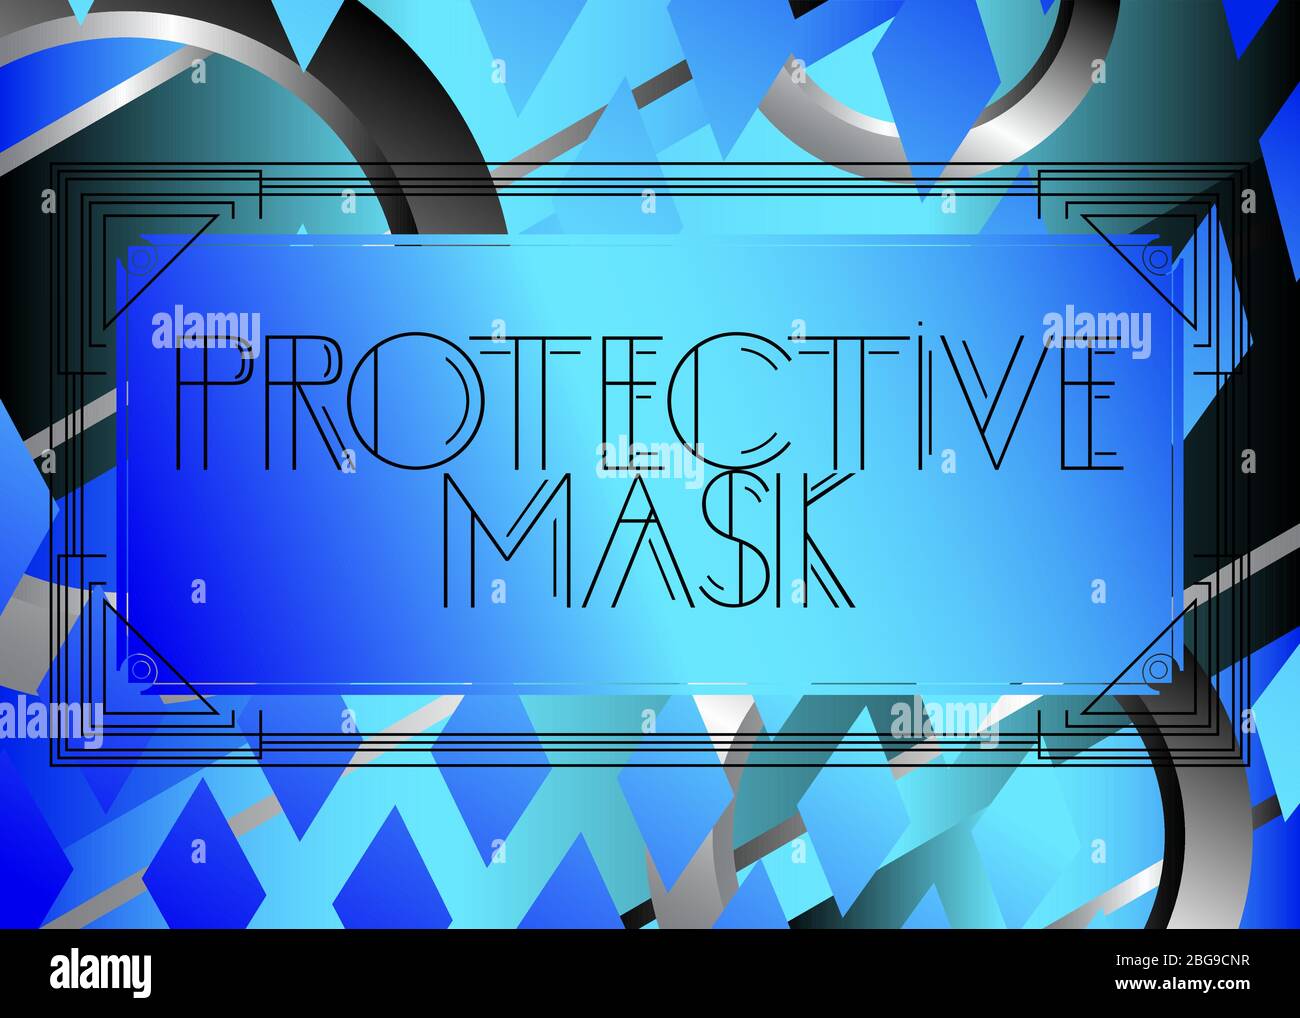 Art Deco Protective Mask text. Decorative greeting card, sign with vintage letters. Stock Vector